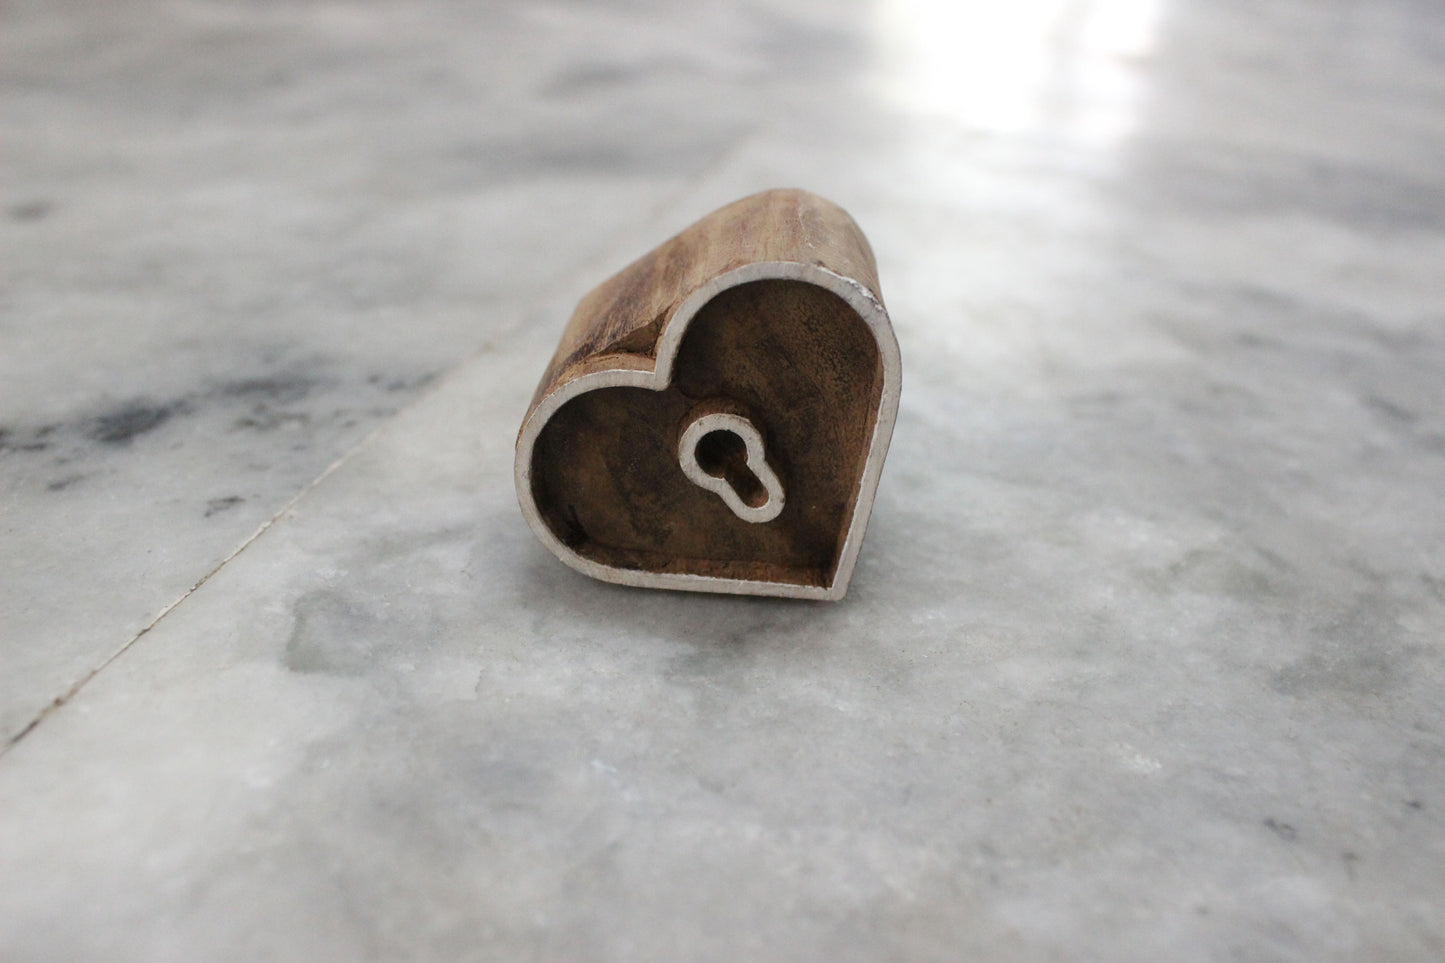 Heart Block Print Stamp Carve Block Stamp Love Wood Block Stamp Hand Carved Textile Block For Printing Indian Soap Making Stamp Traditional Wooden Block